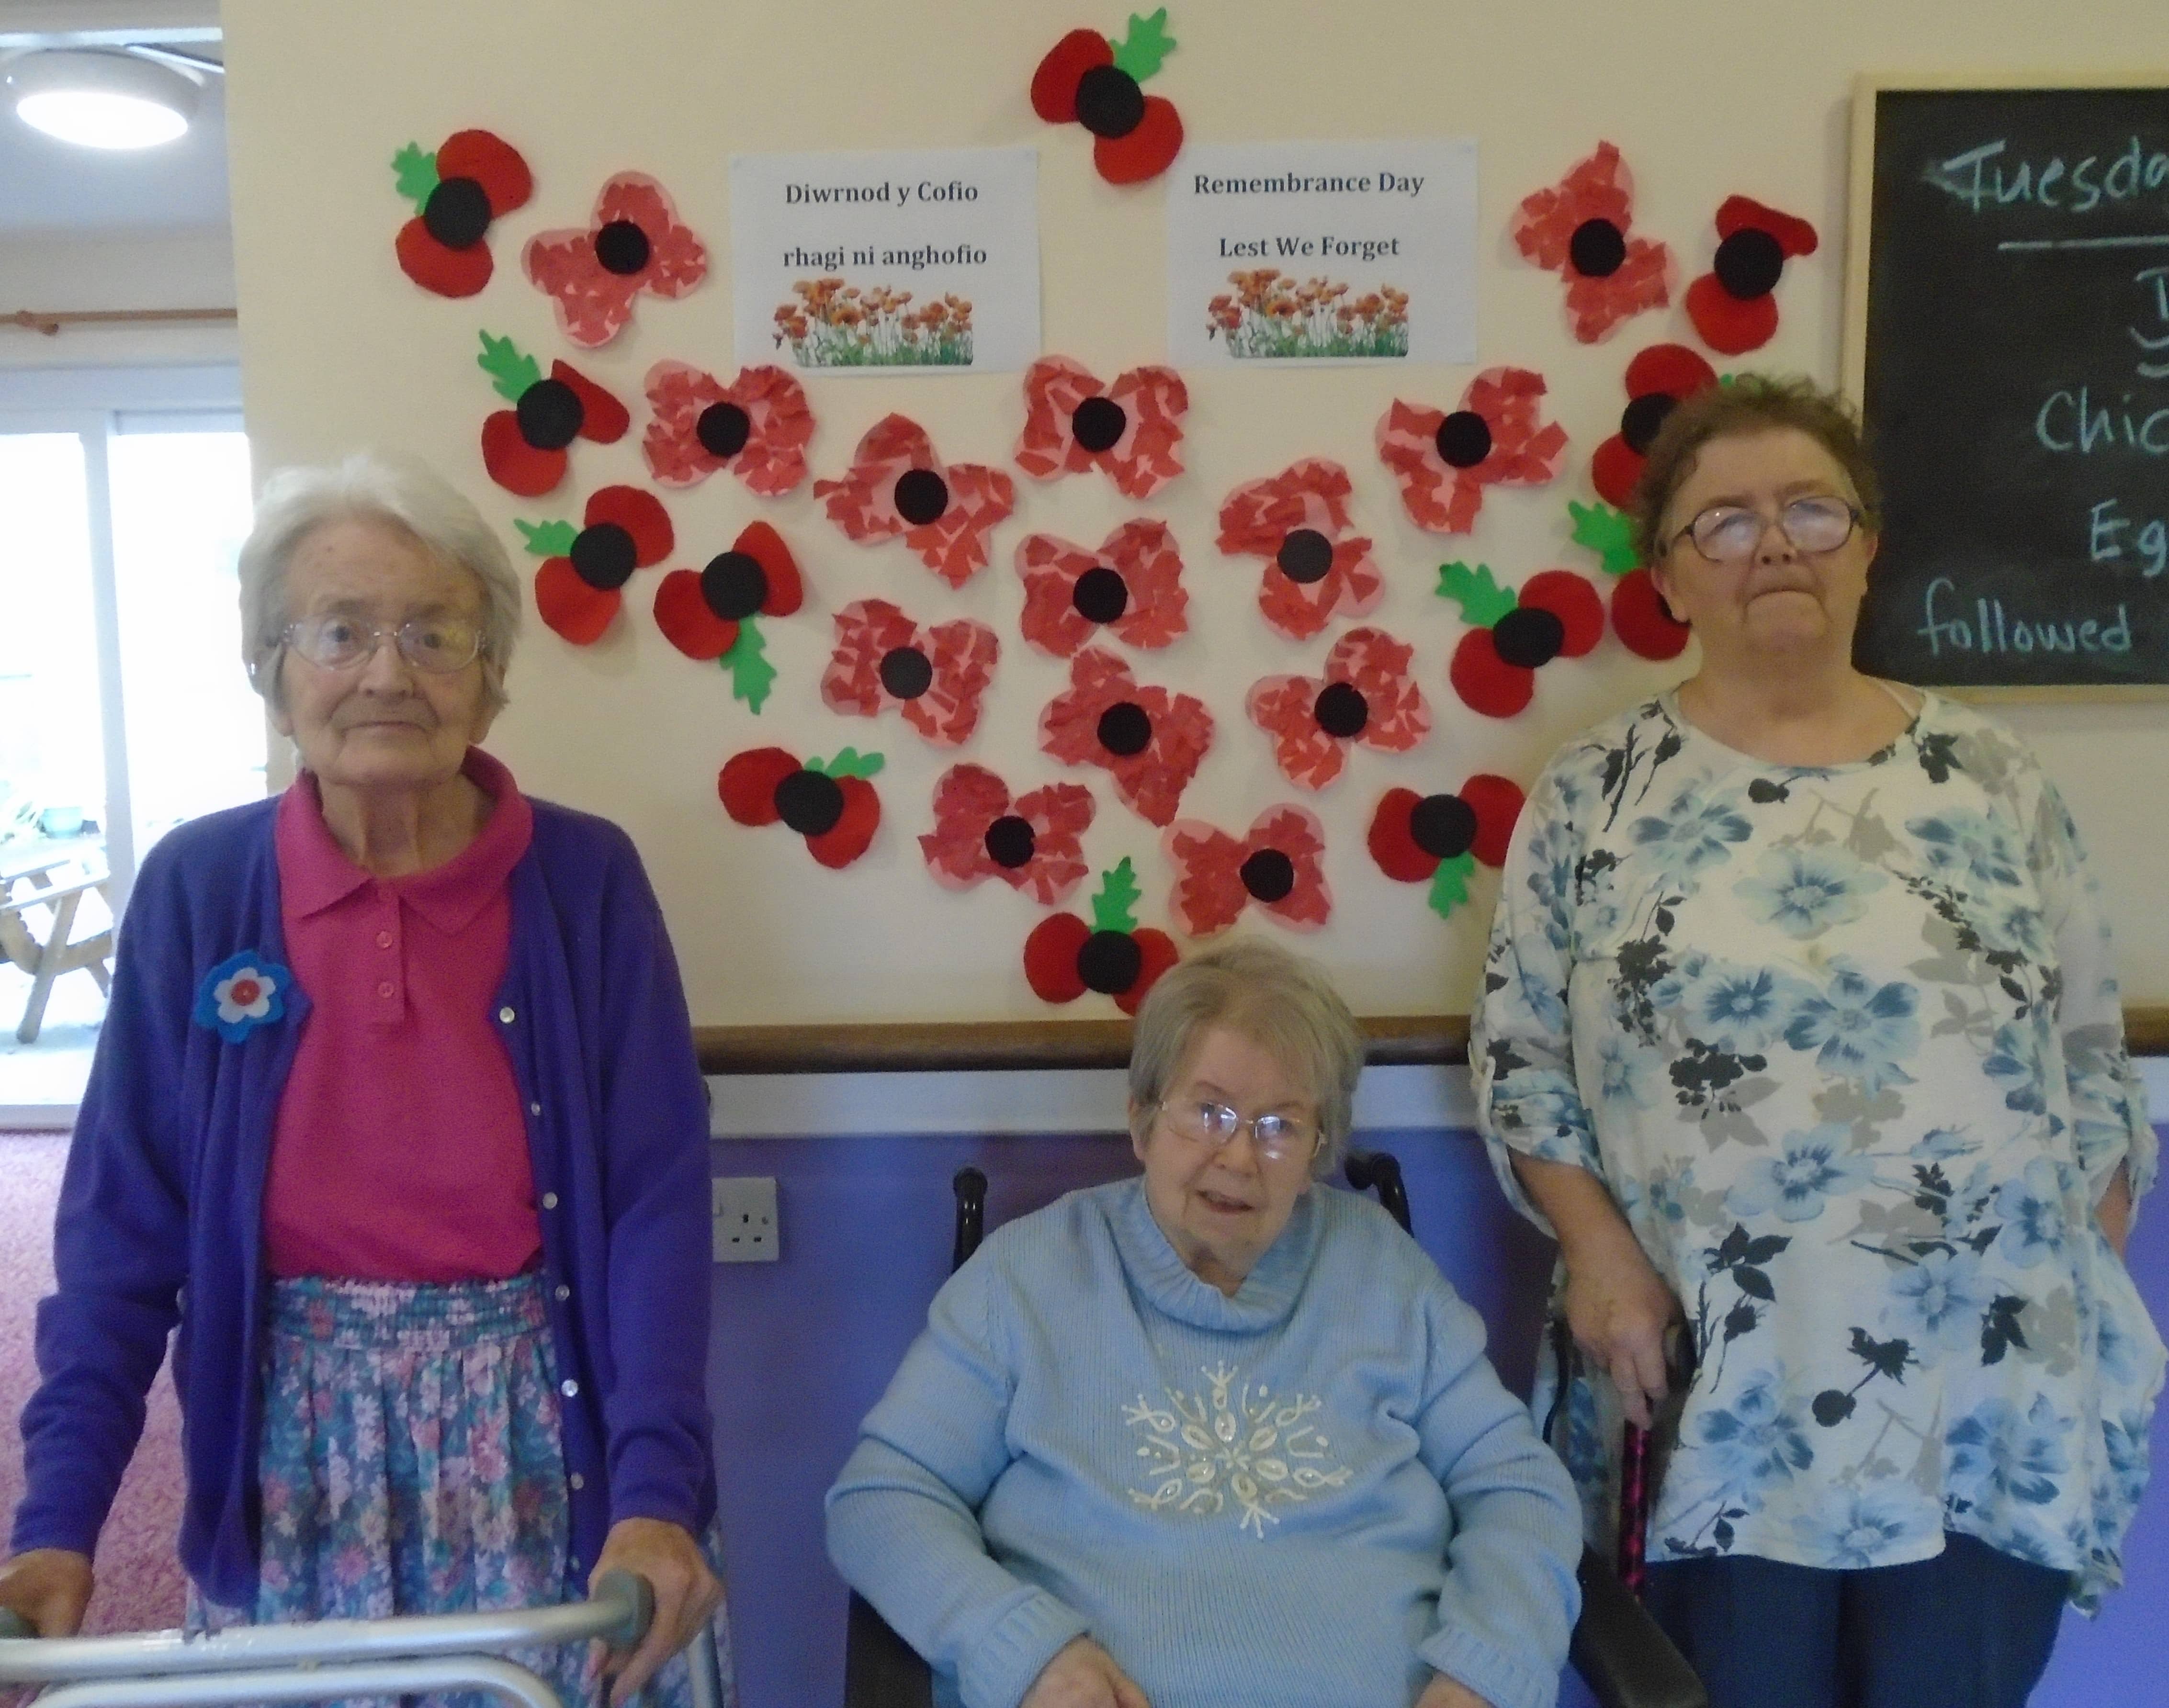 three residents stood by the poppy wall that they made